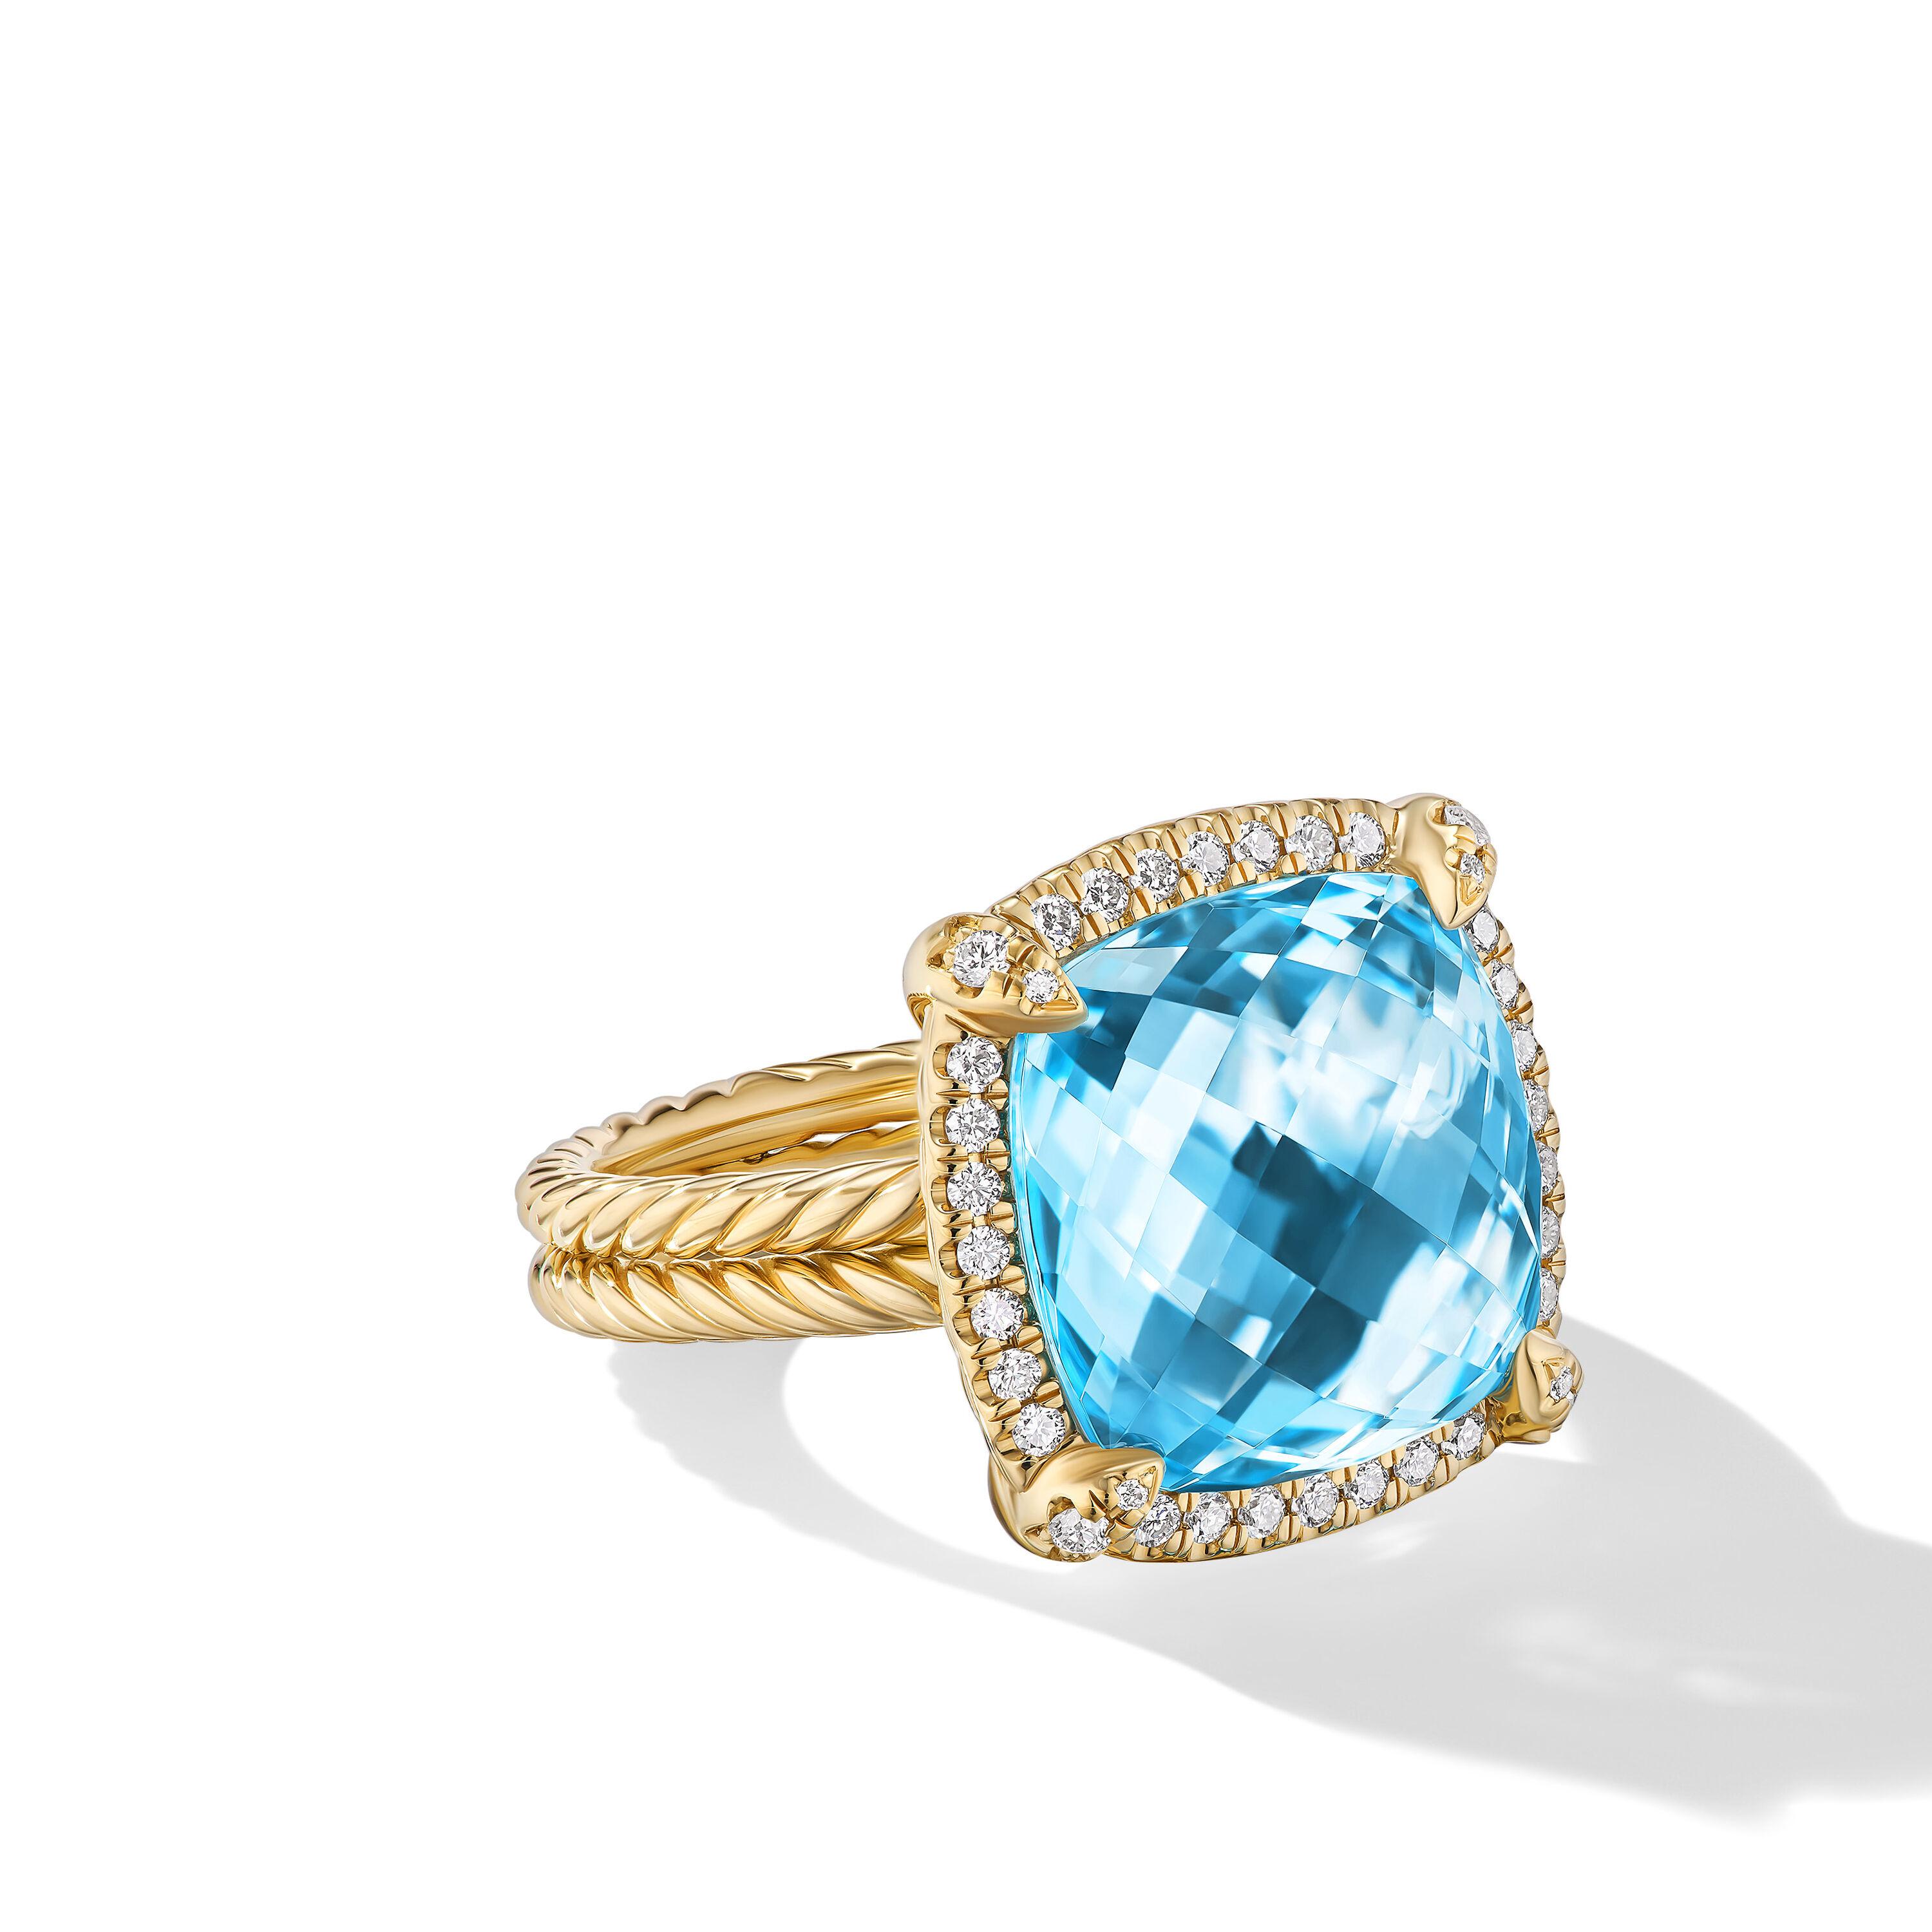 David Yurman Chatelaine 14mm Pave Bezel Ring in 18K Yellow Gold with Blue Topaz and Diamonds